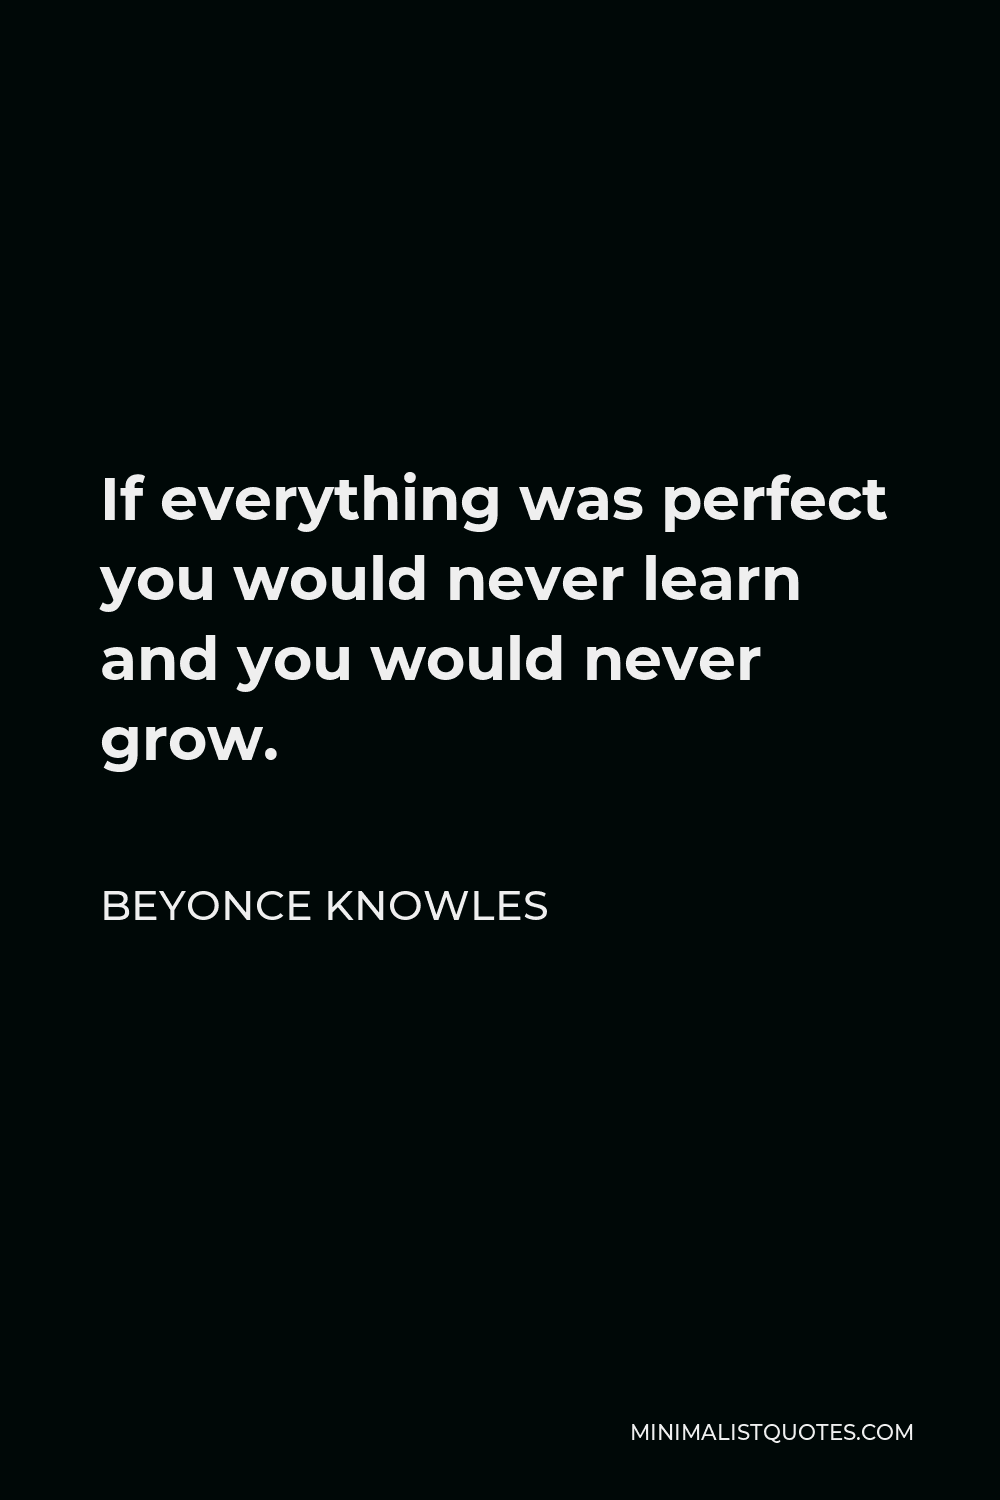 Beyonce Knowles Quote: If everything was perfect you would never learn ...